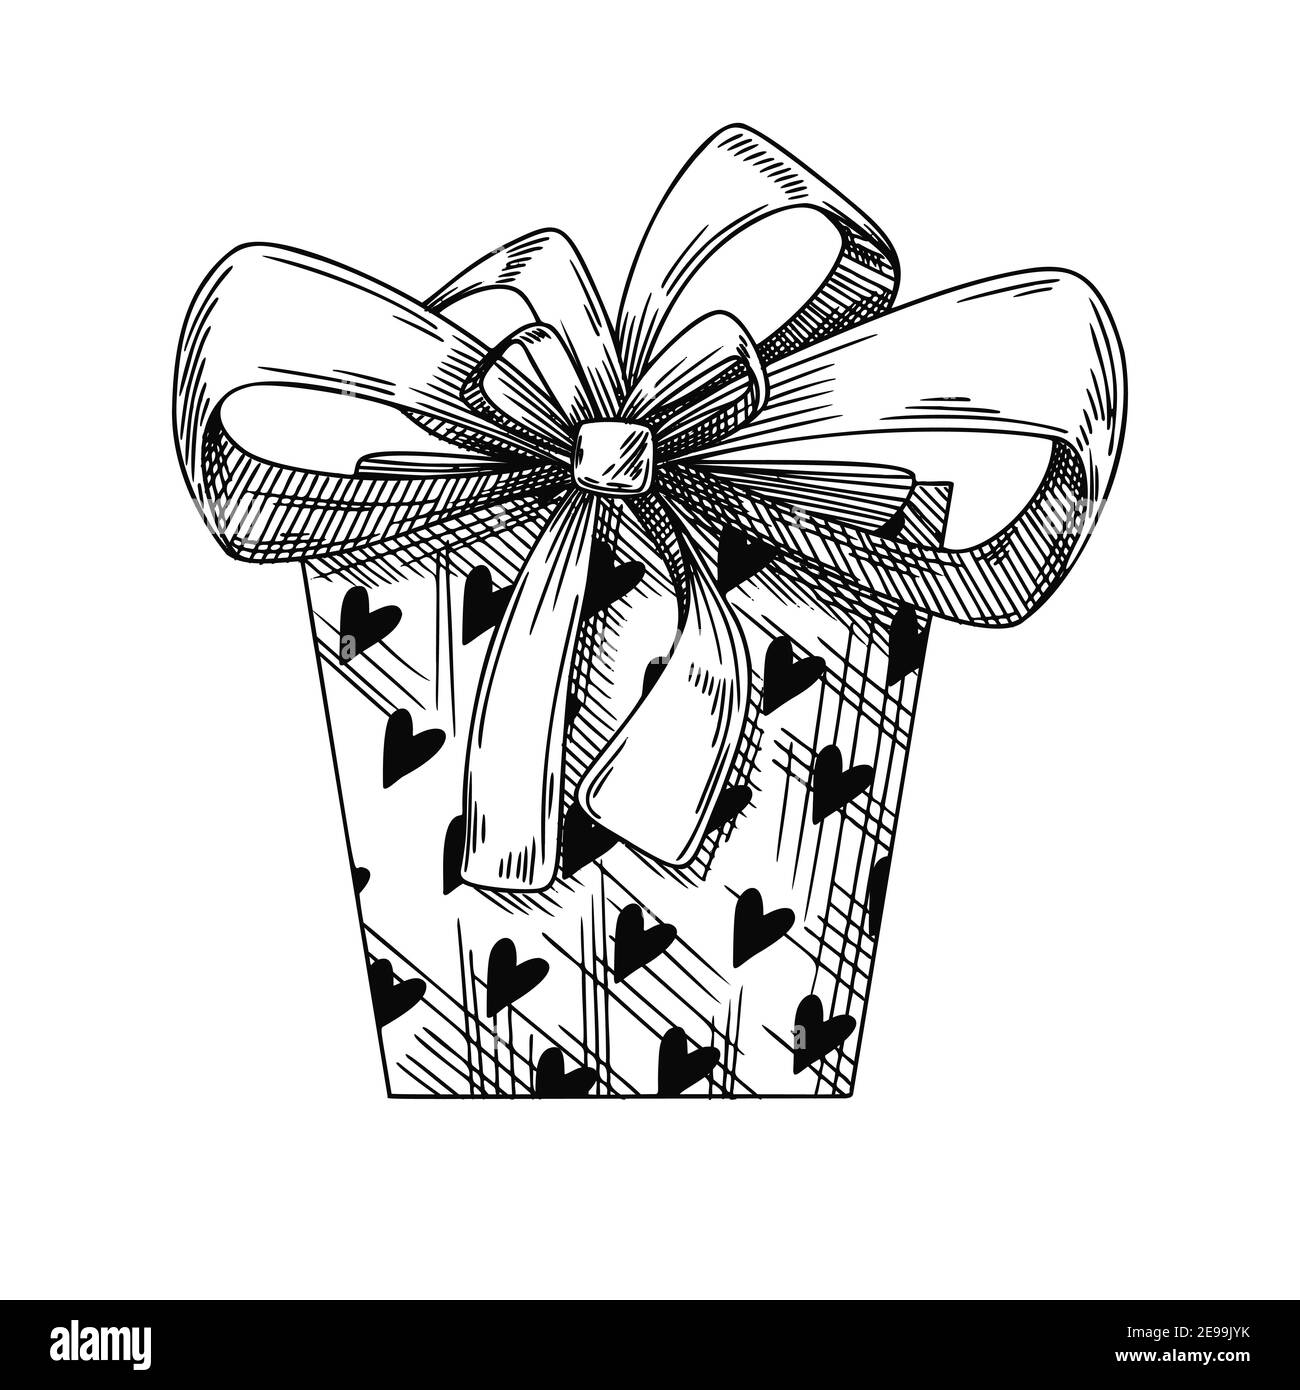 https://c8.alamy.com/comp/2E99JYK/gift-sketch-with-bow-festive-packaging-valentines-day-gift-vector-illustration-2E99JYK.jpg